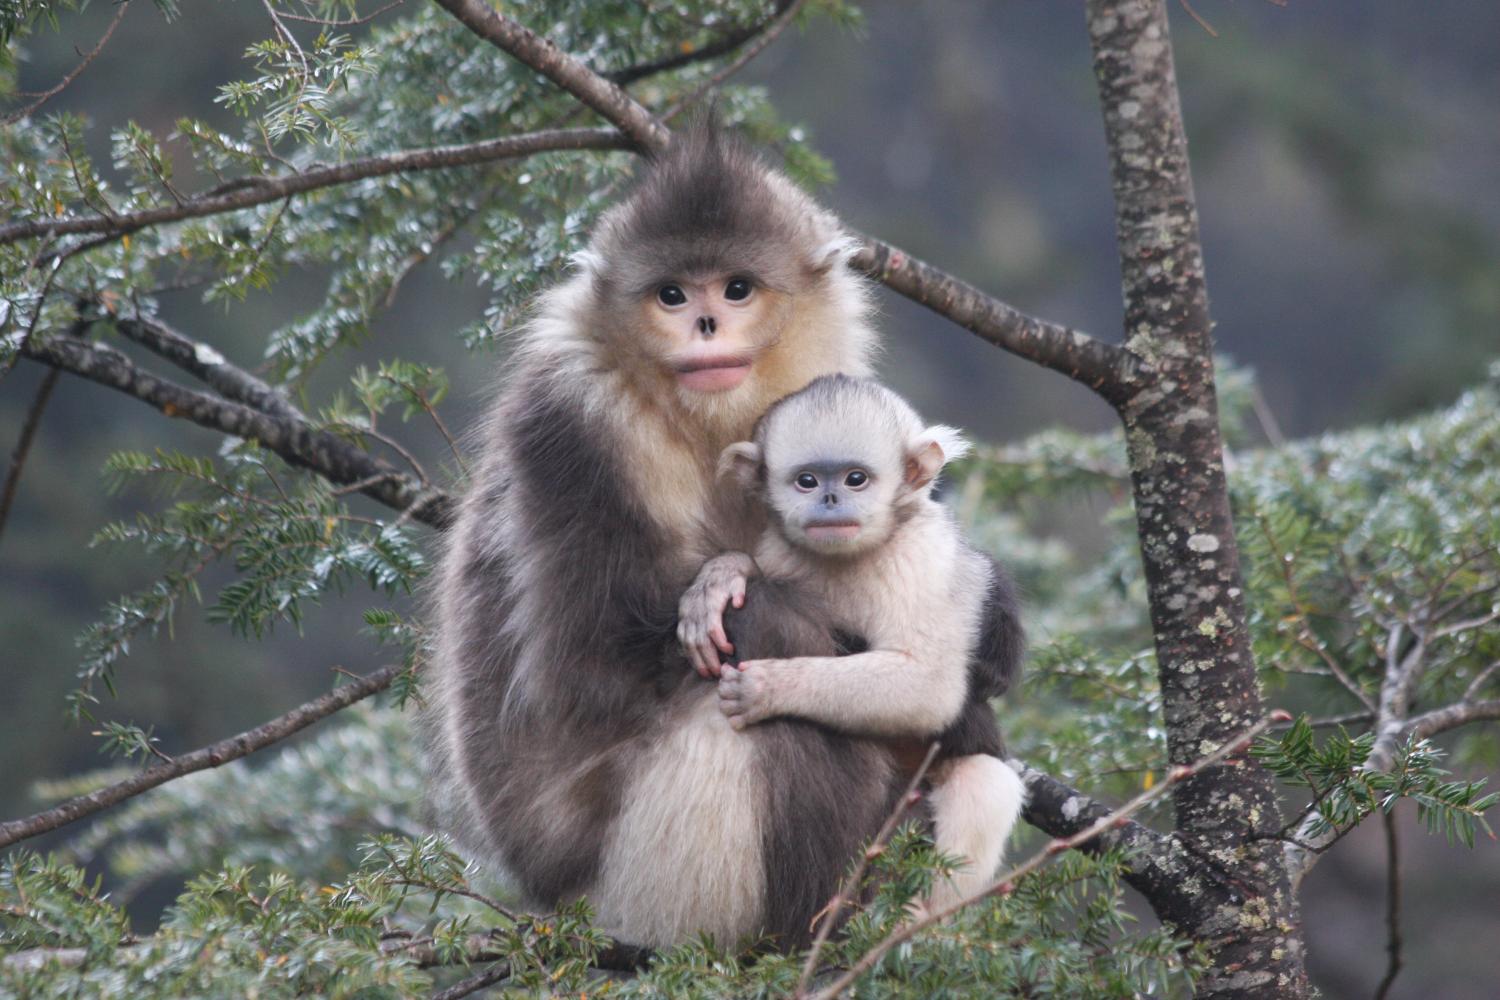 This Sad-Looking Monkey Just Got Its Genome Sequenced